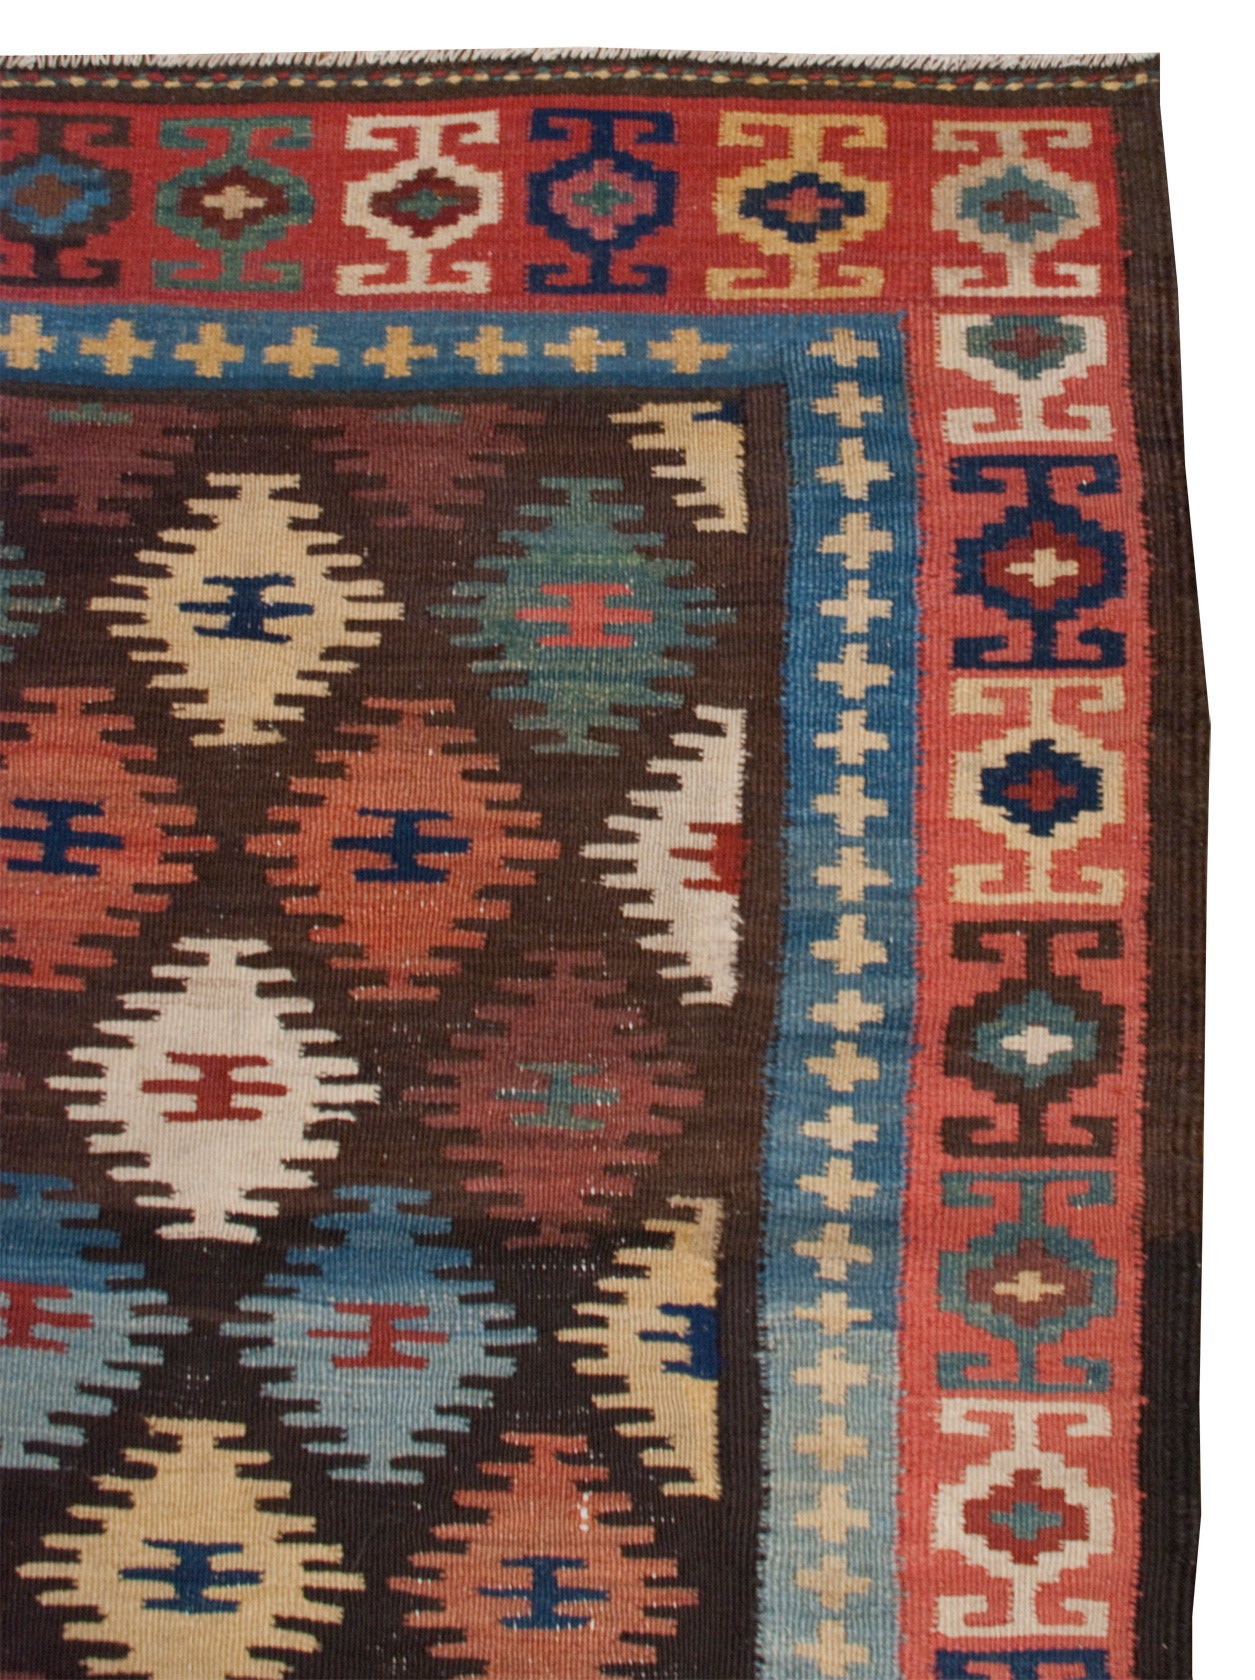 An early 20th century Persin Hersari Kilim runner with a beautiful multicolored diamond field, surrounded by a complementary multicolored geometric border.